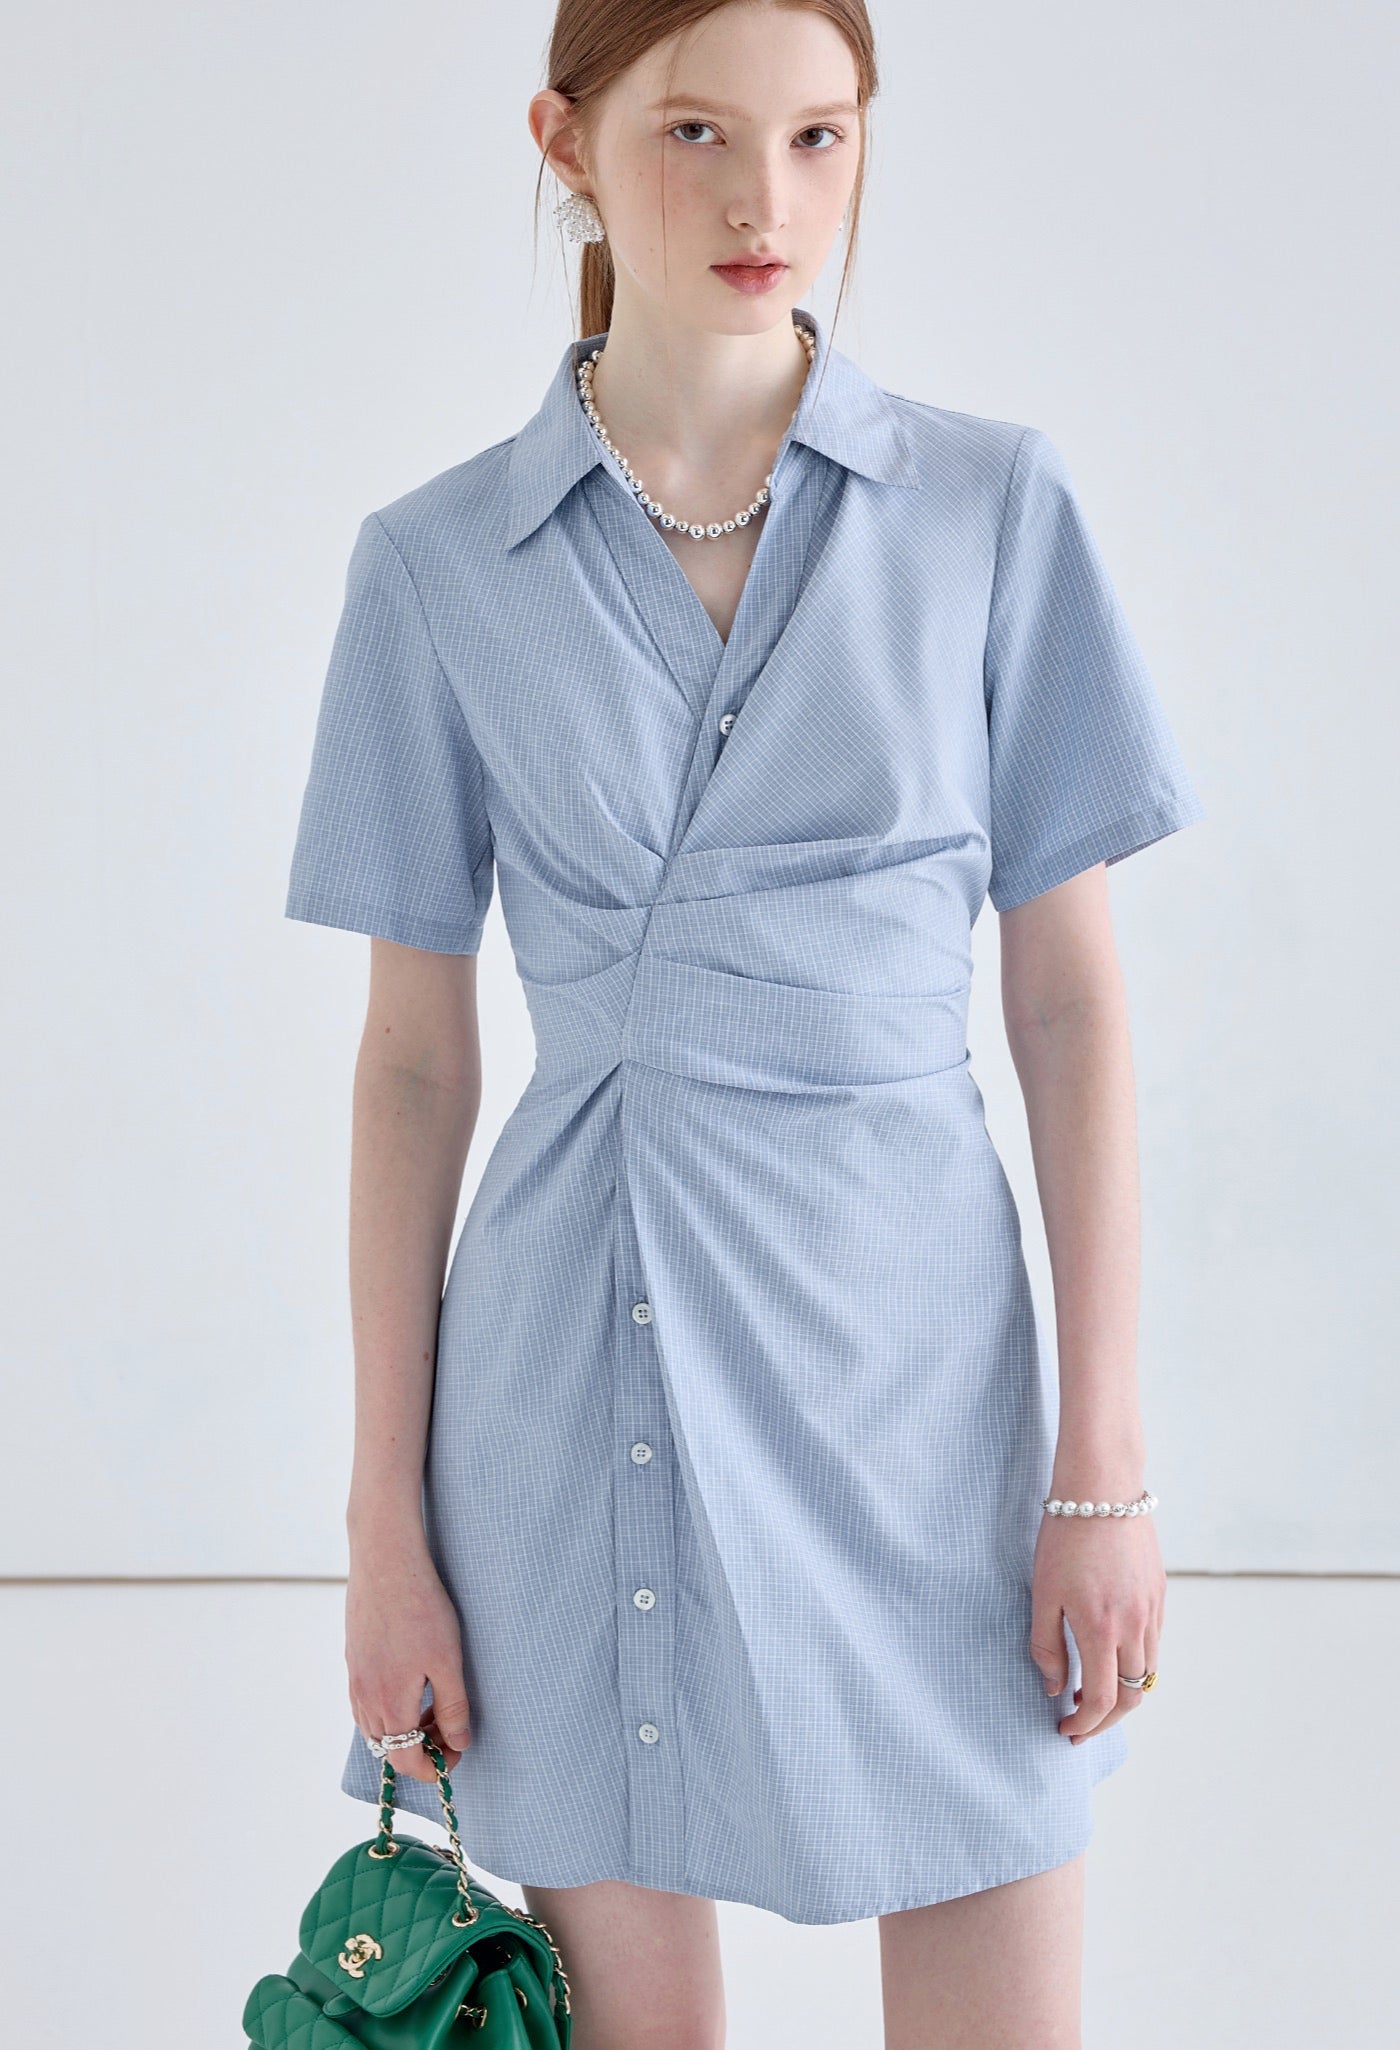 knotted,shirt,onepiece,blue,cute,cool,sexy,modern,simple